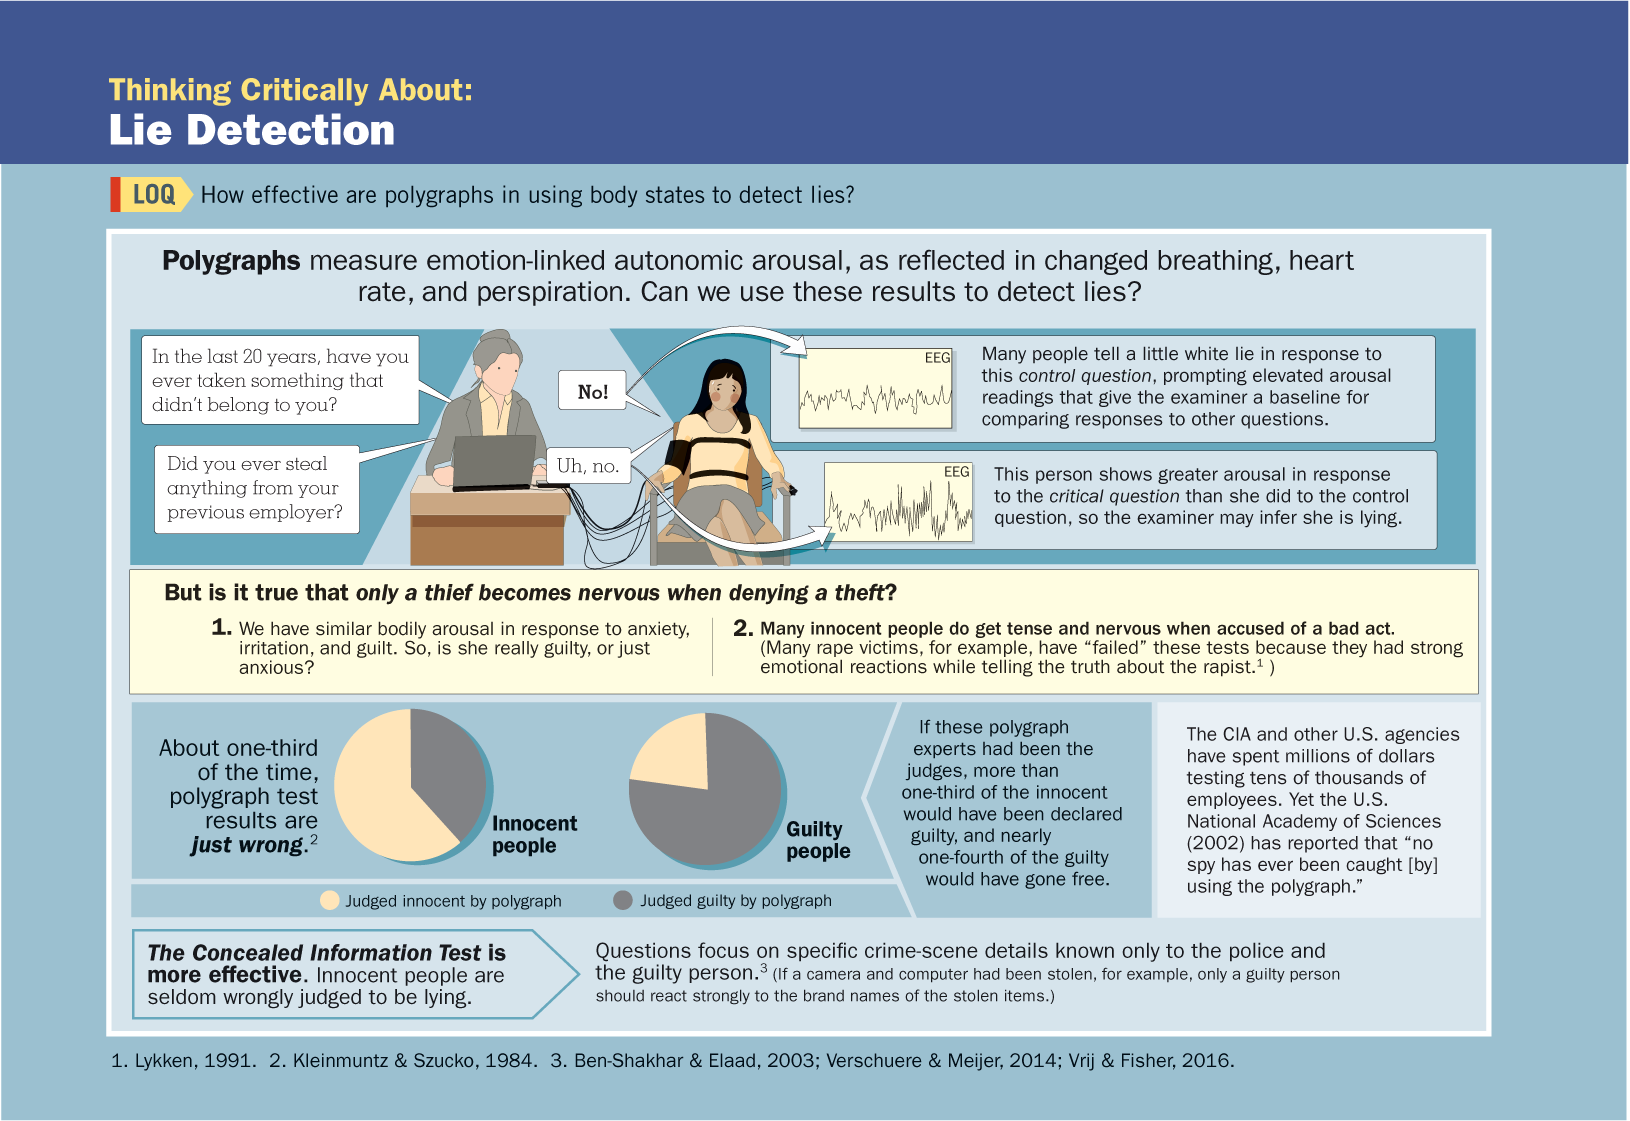 An infographic about lie detection. You can read full description from the link below